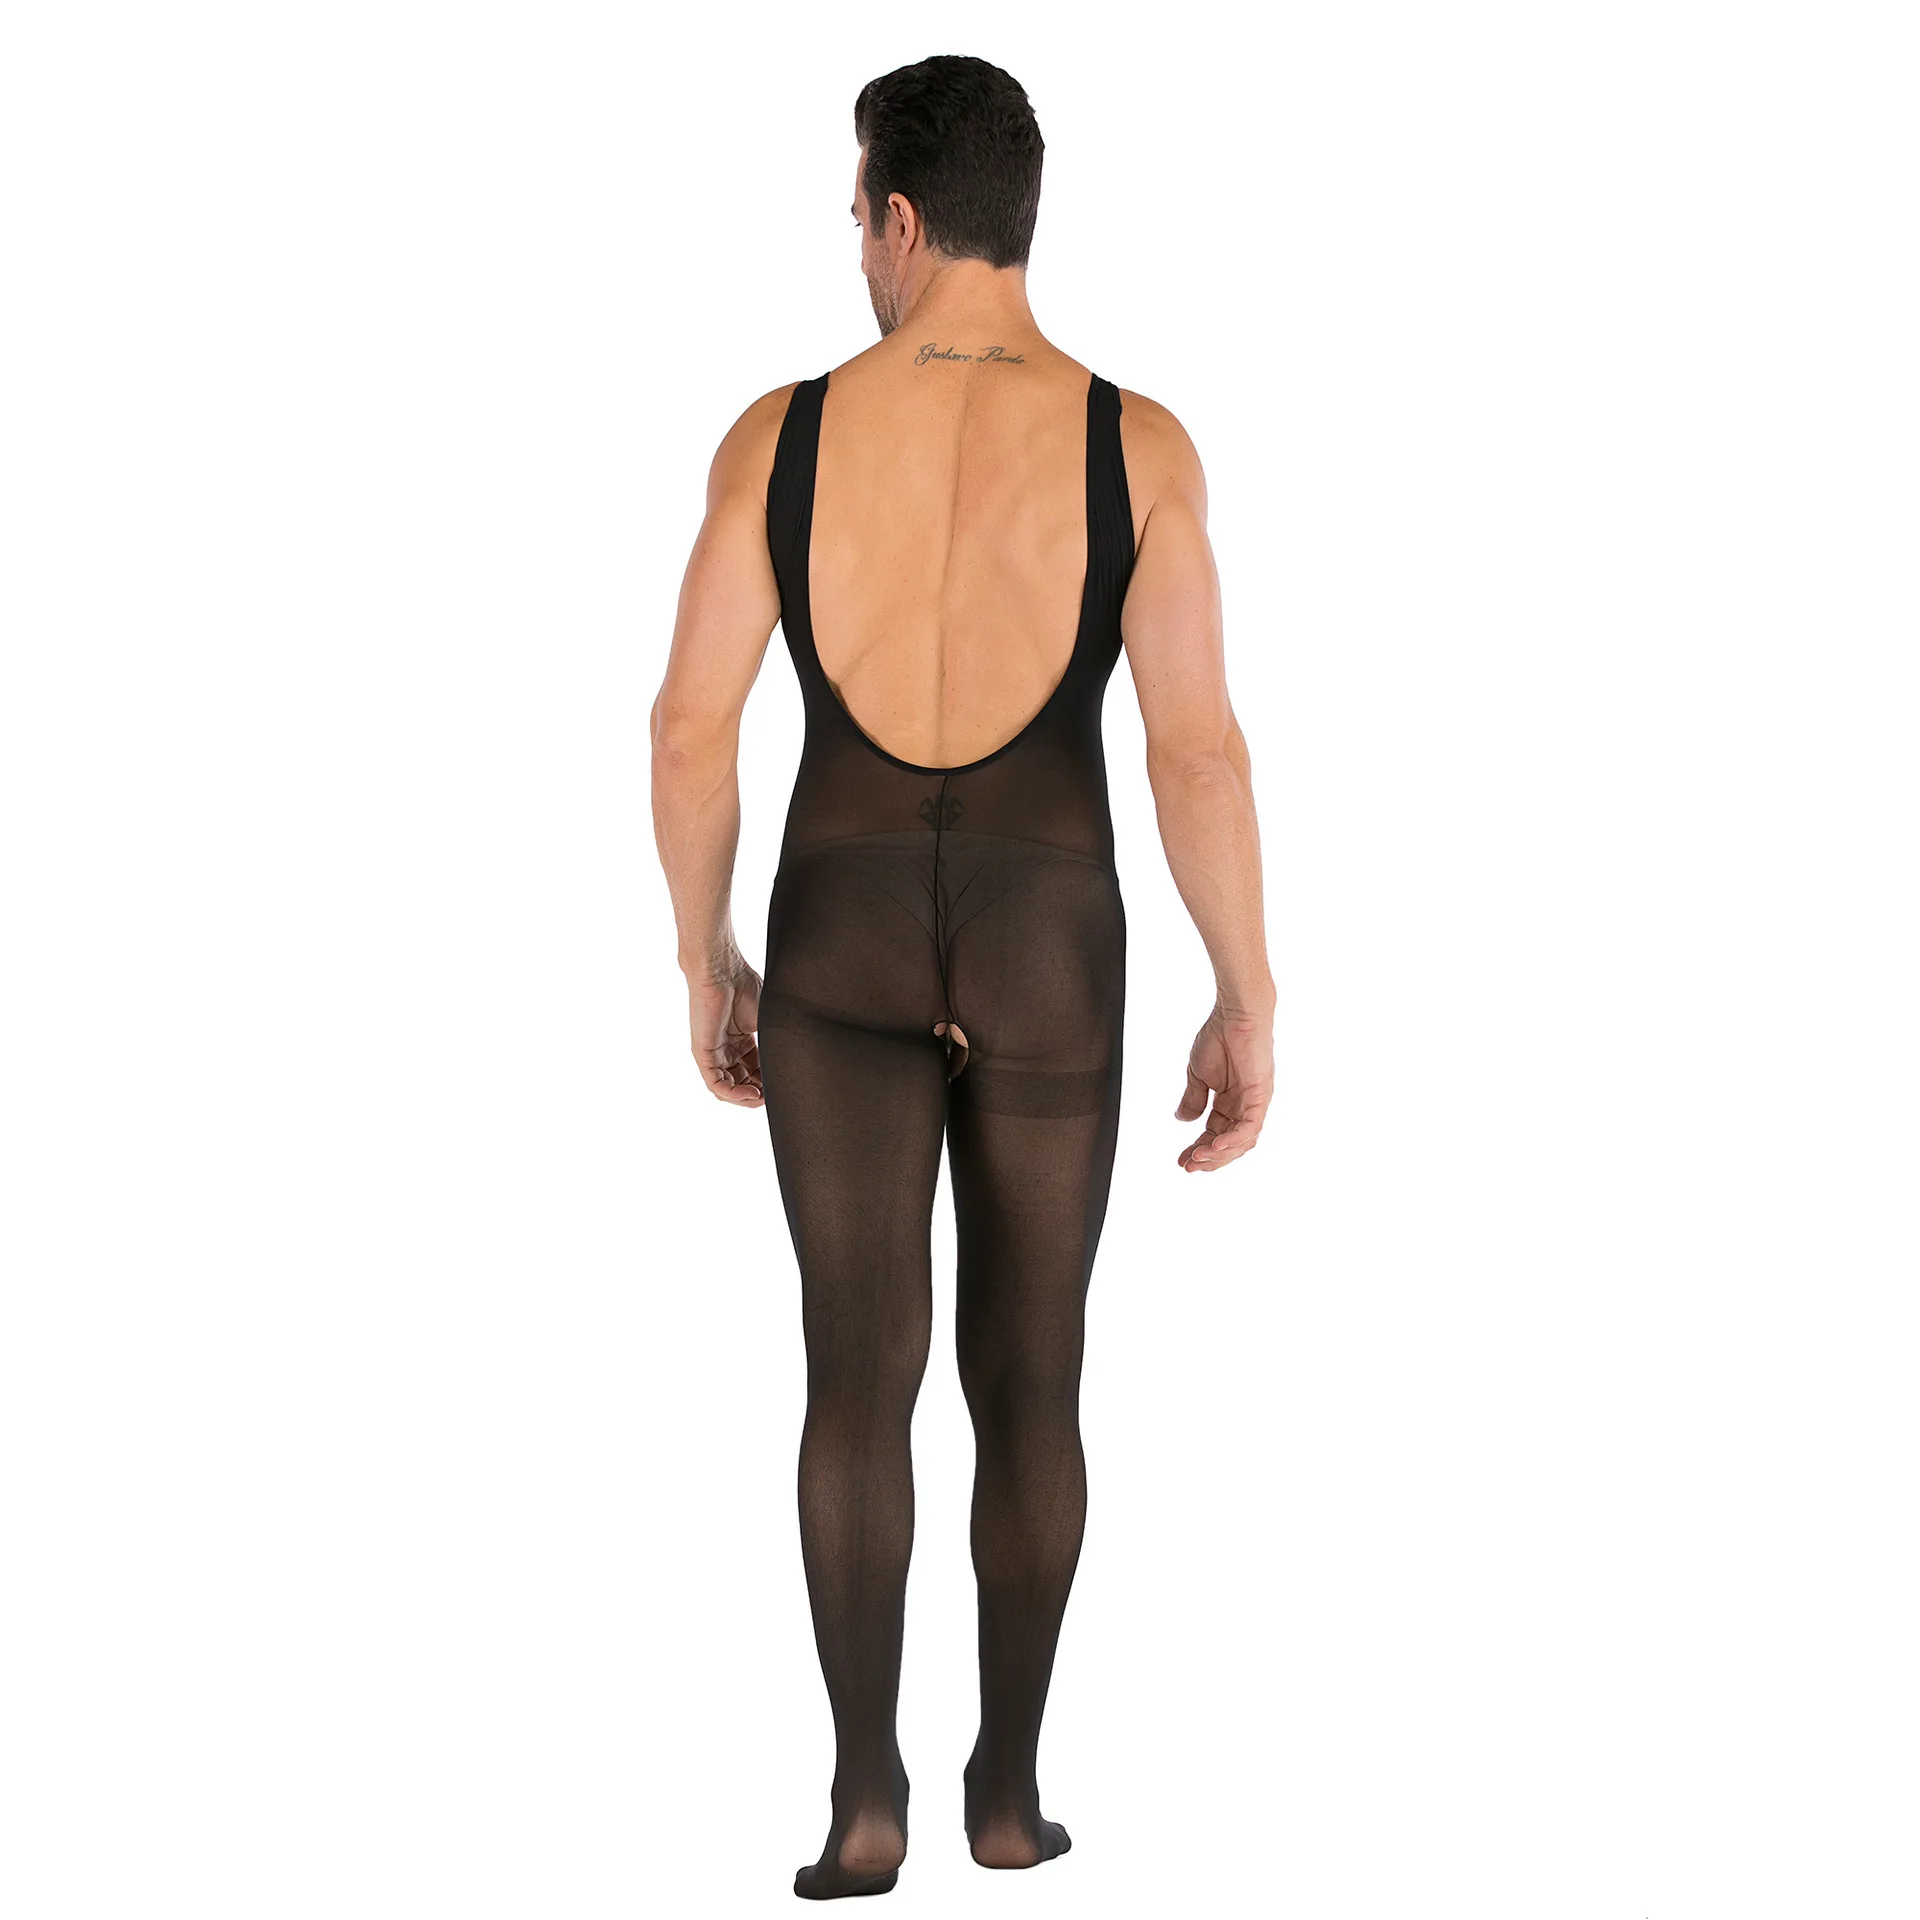 Men jumpsuits transparent stockings outfit sexy temptation to open files fishnet tights uniforms most comfortable boxer briefs